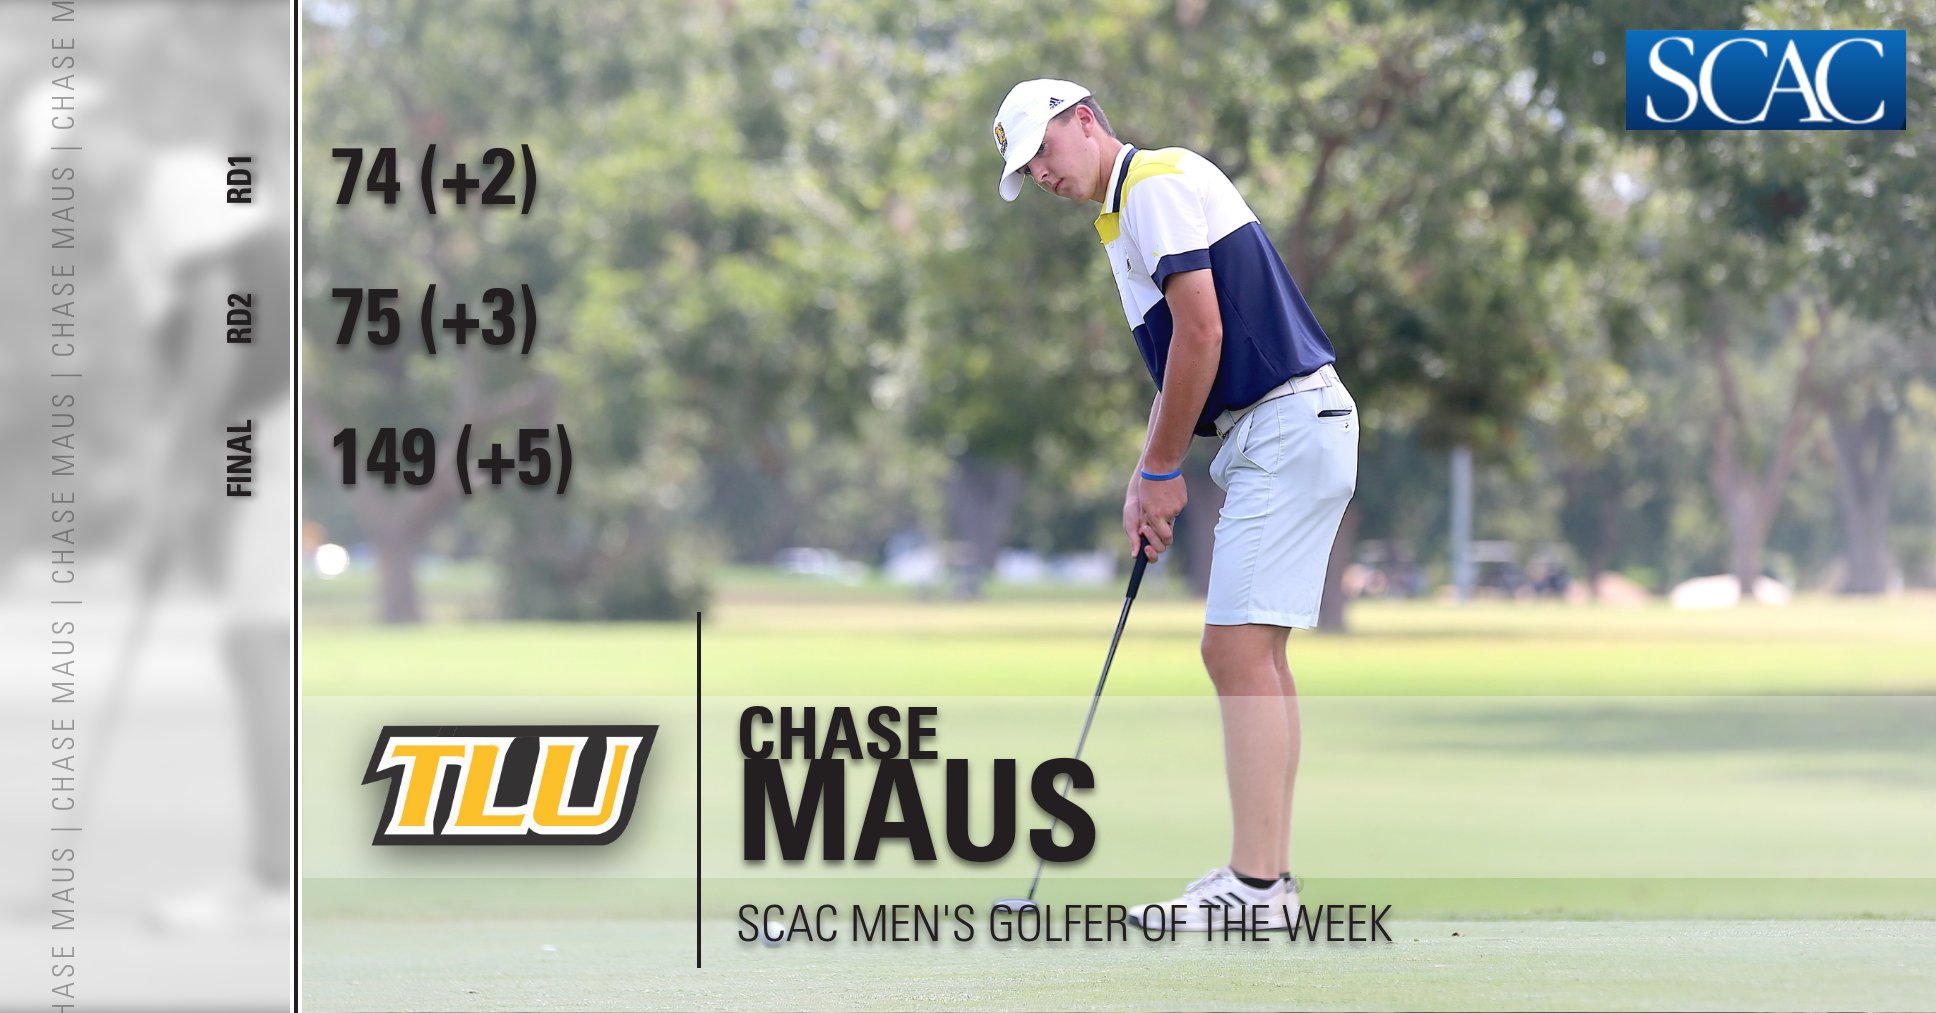 Chase Maus collects second SCAC Golfer of the Week award of 2019-20